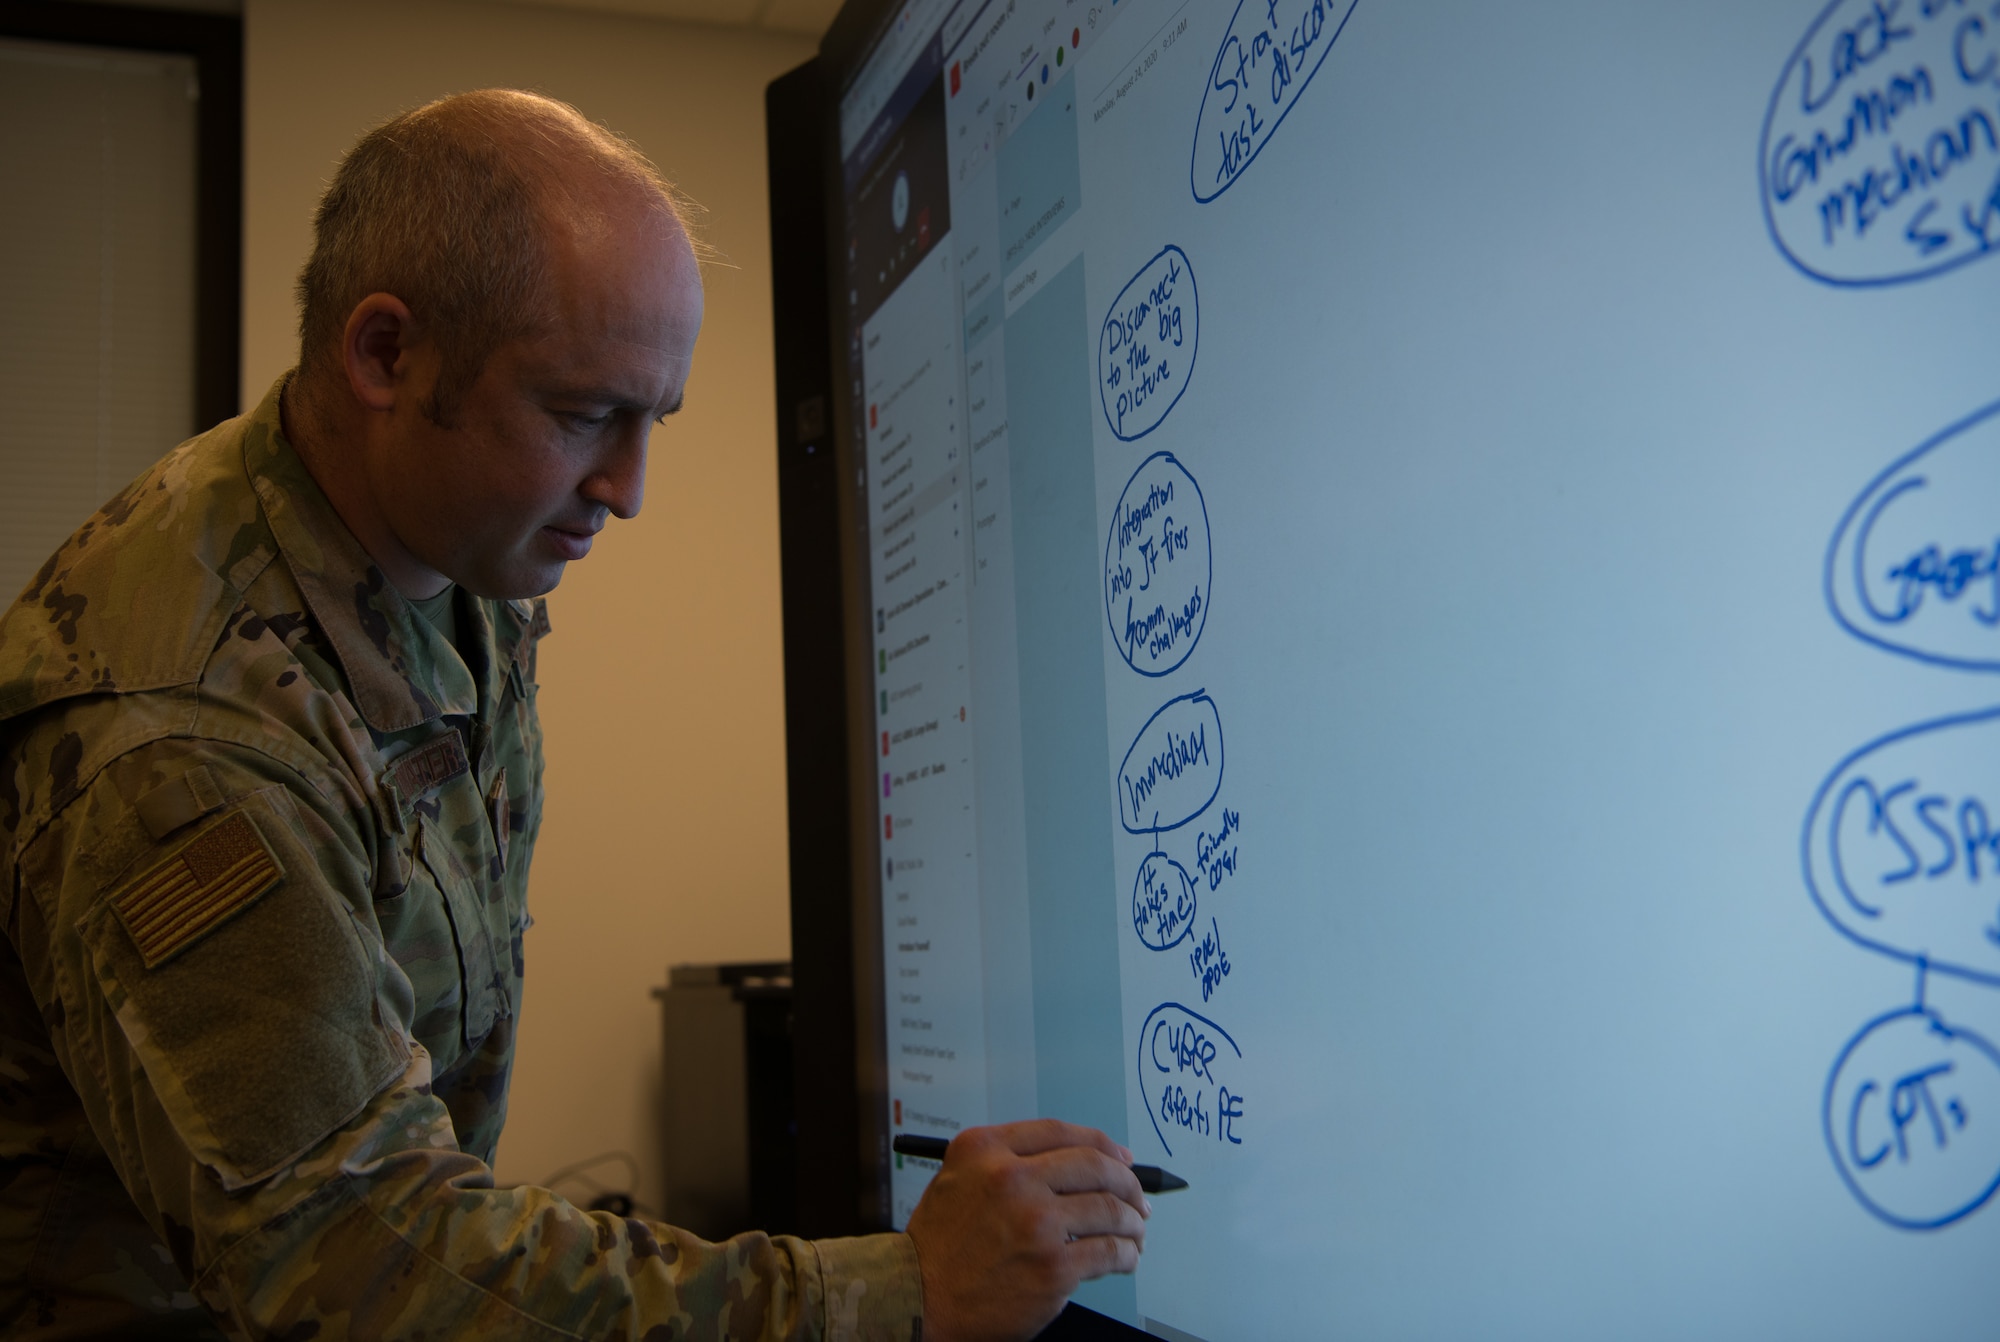 Maj. Scott Van De Water, chief of the Doctrine Outreach Division at the Curtis E. LeMay Center for Doctrine Development and Education, writes down notes taken from virtual participants of the Chennault Workshop 4, Aug. 24-25, 2020, at Maxwell Air Force Base, Alabama. The workshop brought together virtually and in-person nearly 75 warfighters, operators and planners from around the world to develop a better way to design integrated tasking orders, starting with one for the recently published doctrine Annex 3-1, Department of the Air Force Role in Joint All-Domain Operations. (U.S. Air Force photo by Airman 1st Class Jackson Manske)